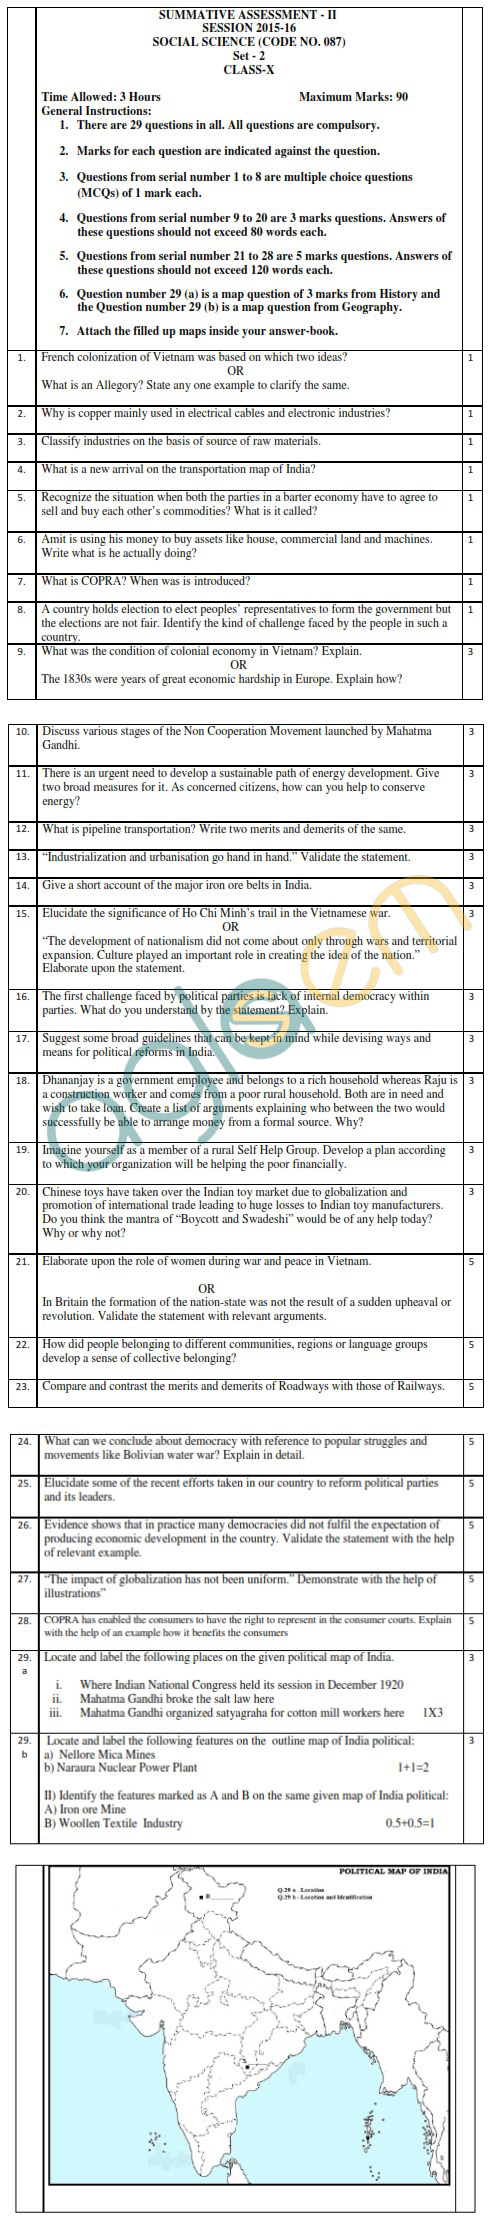 Sample Question Papers for Class IX and X - CBSE